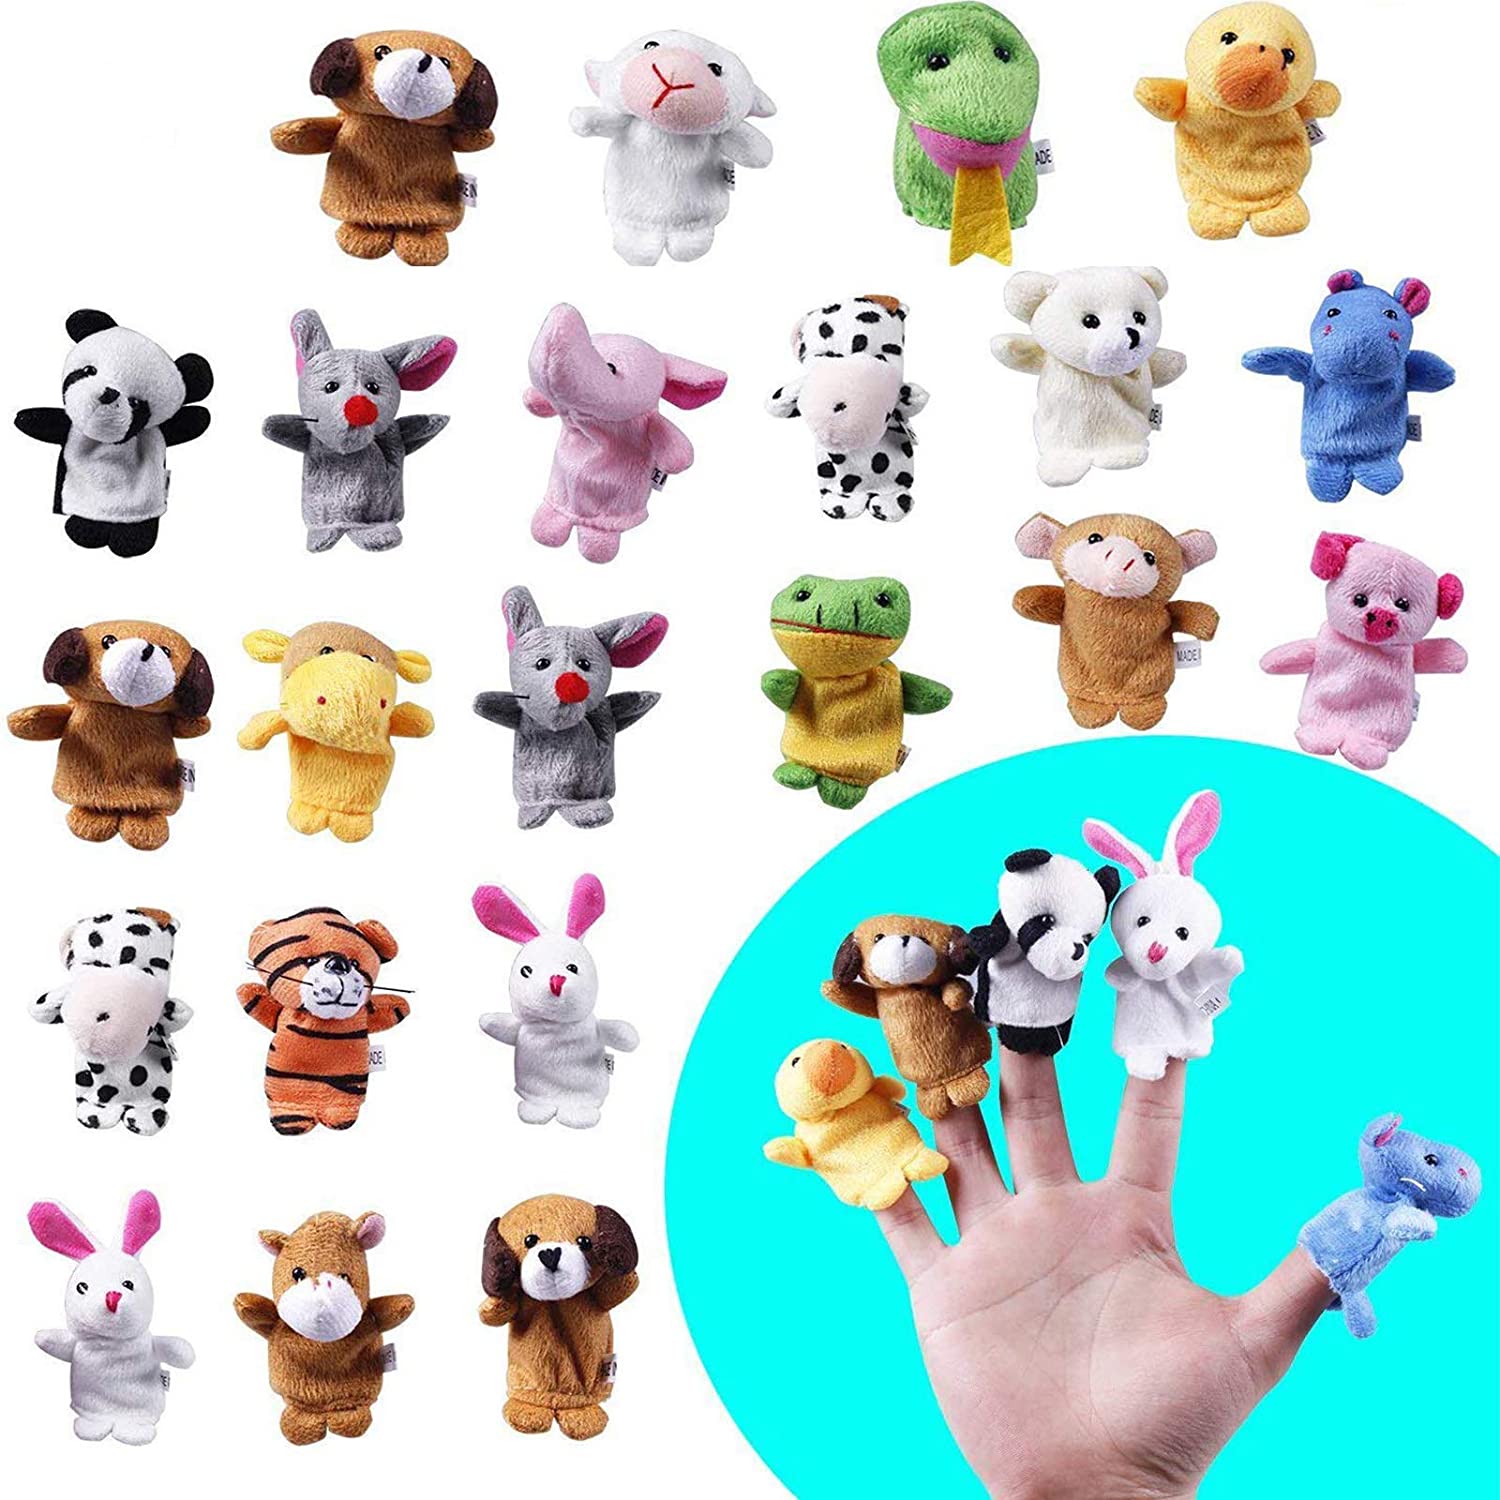 12 Inches Soft Plush Animal Hand Puppets for Kids Storytelling Props Hippo 